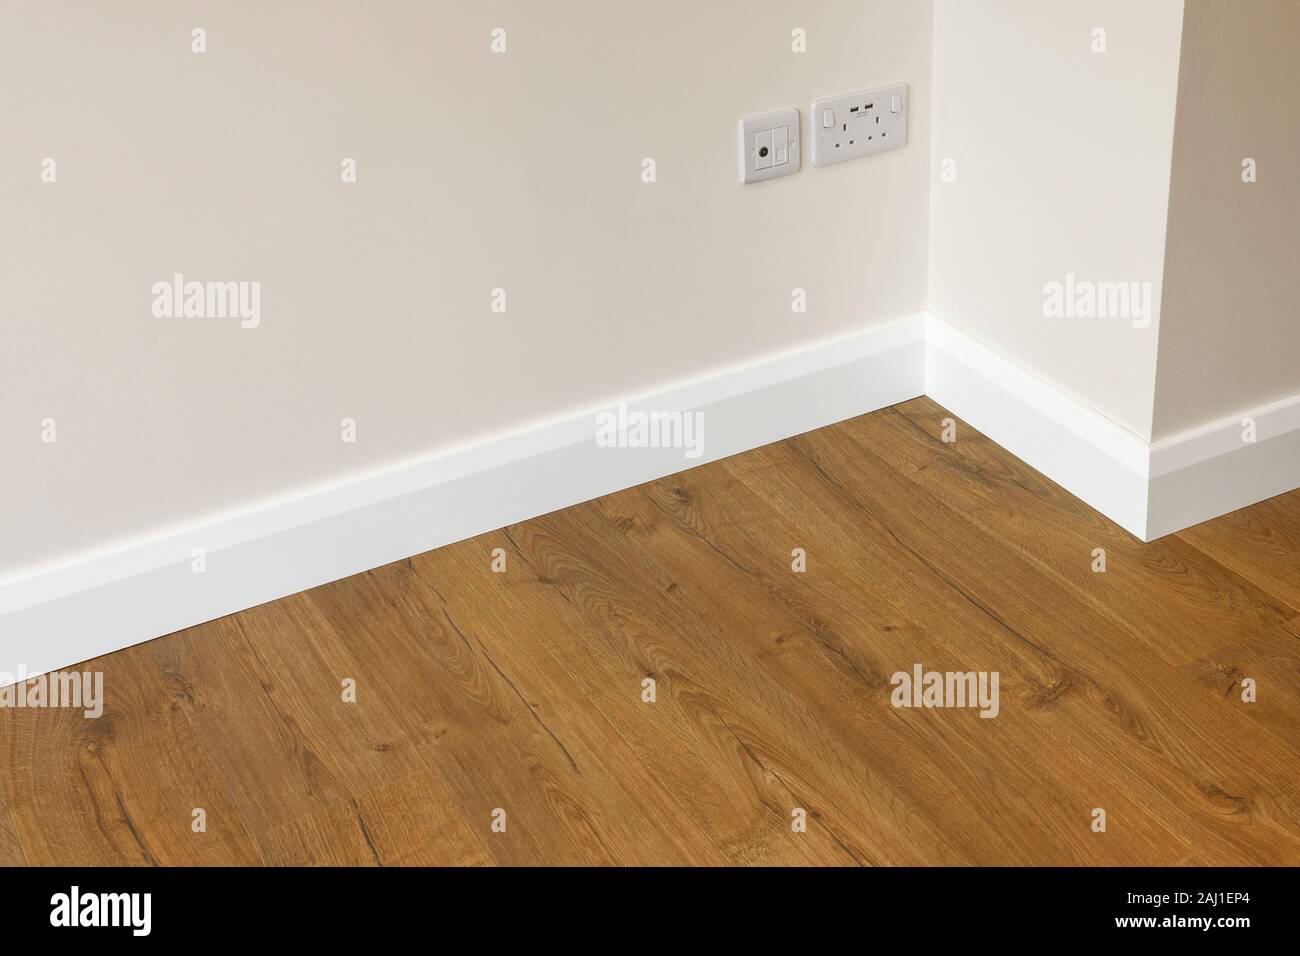 Close up detail of oak effect laminate flooring adjacent to a wall and skirting board Stock Photo